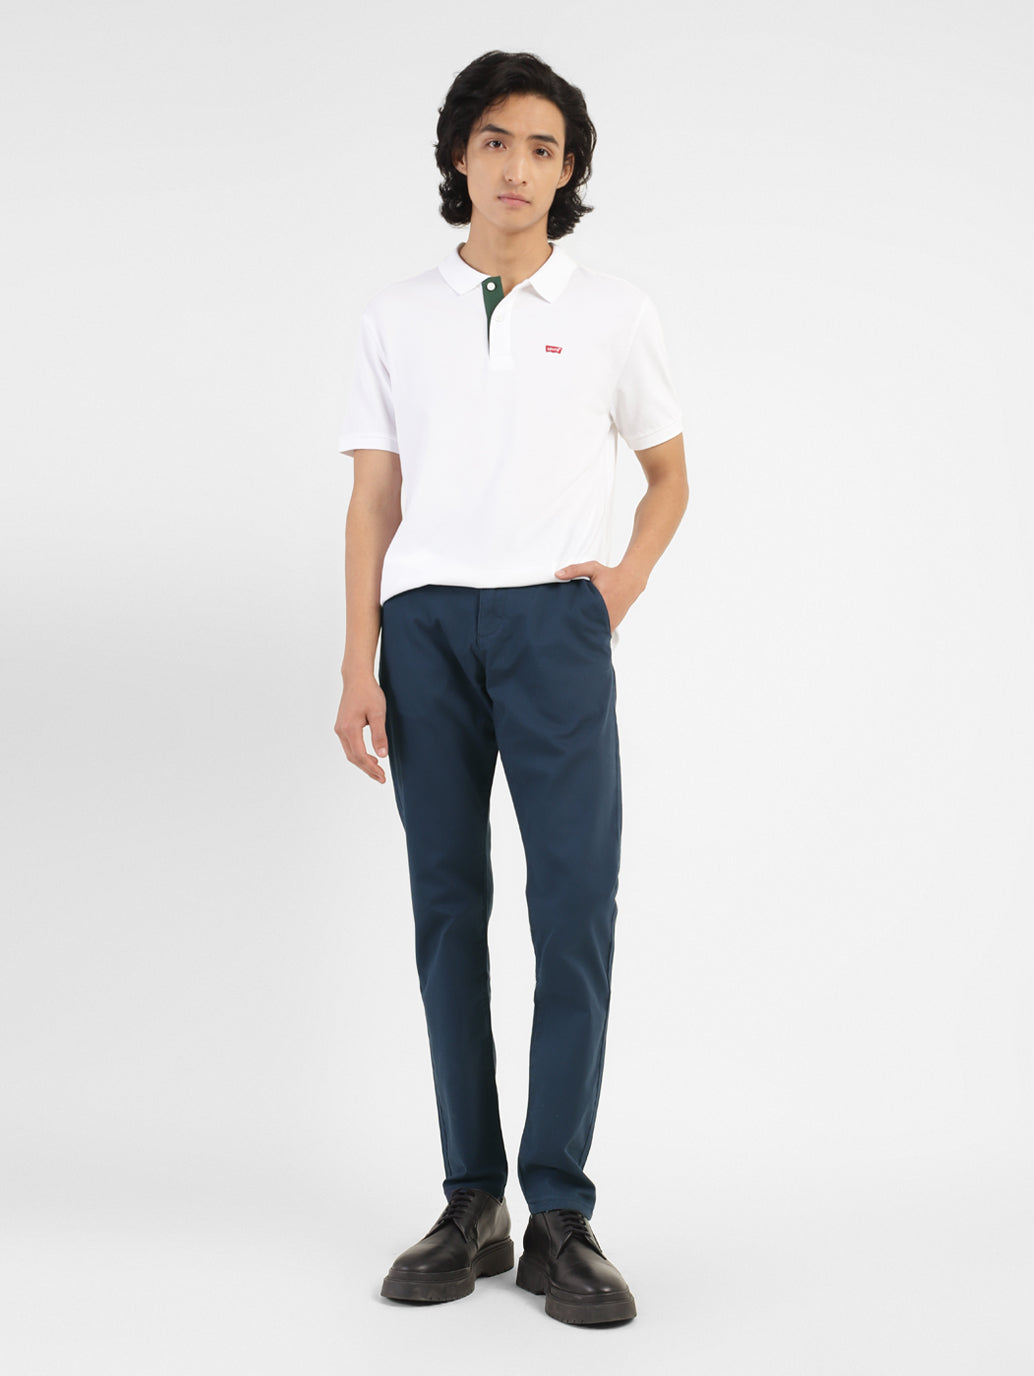 Men's 512 Blue Slim Tapered Fit Chinos